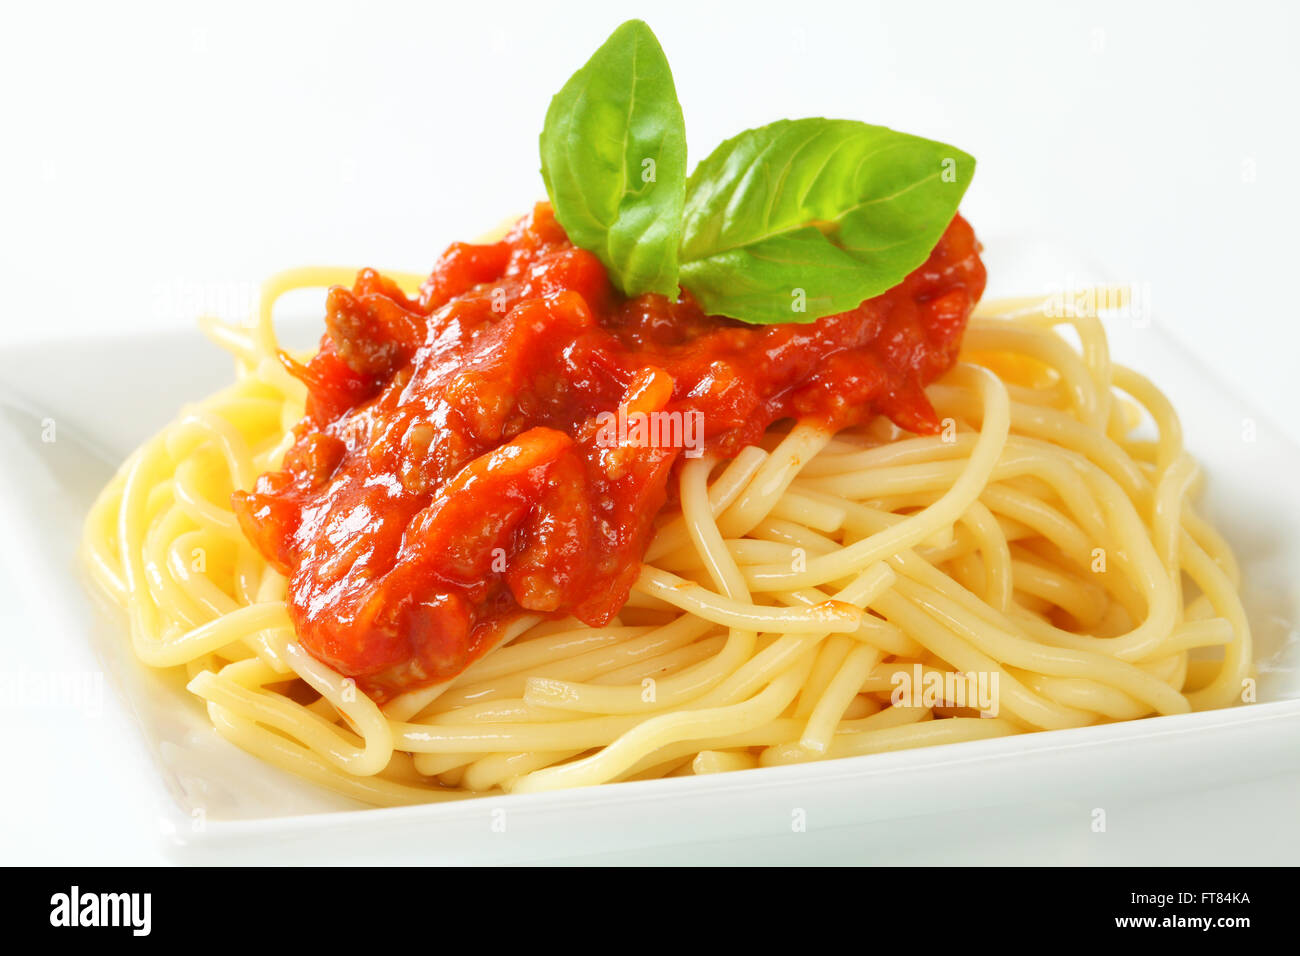 Spaghetti with sweet and sour sauce Stock Photo